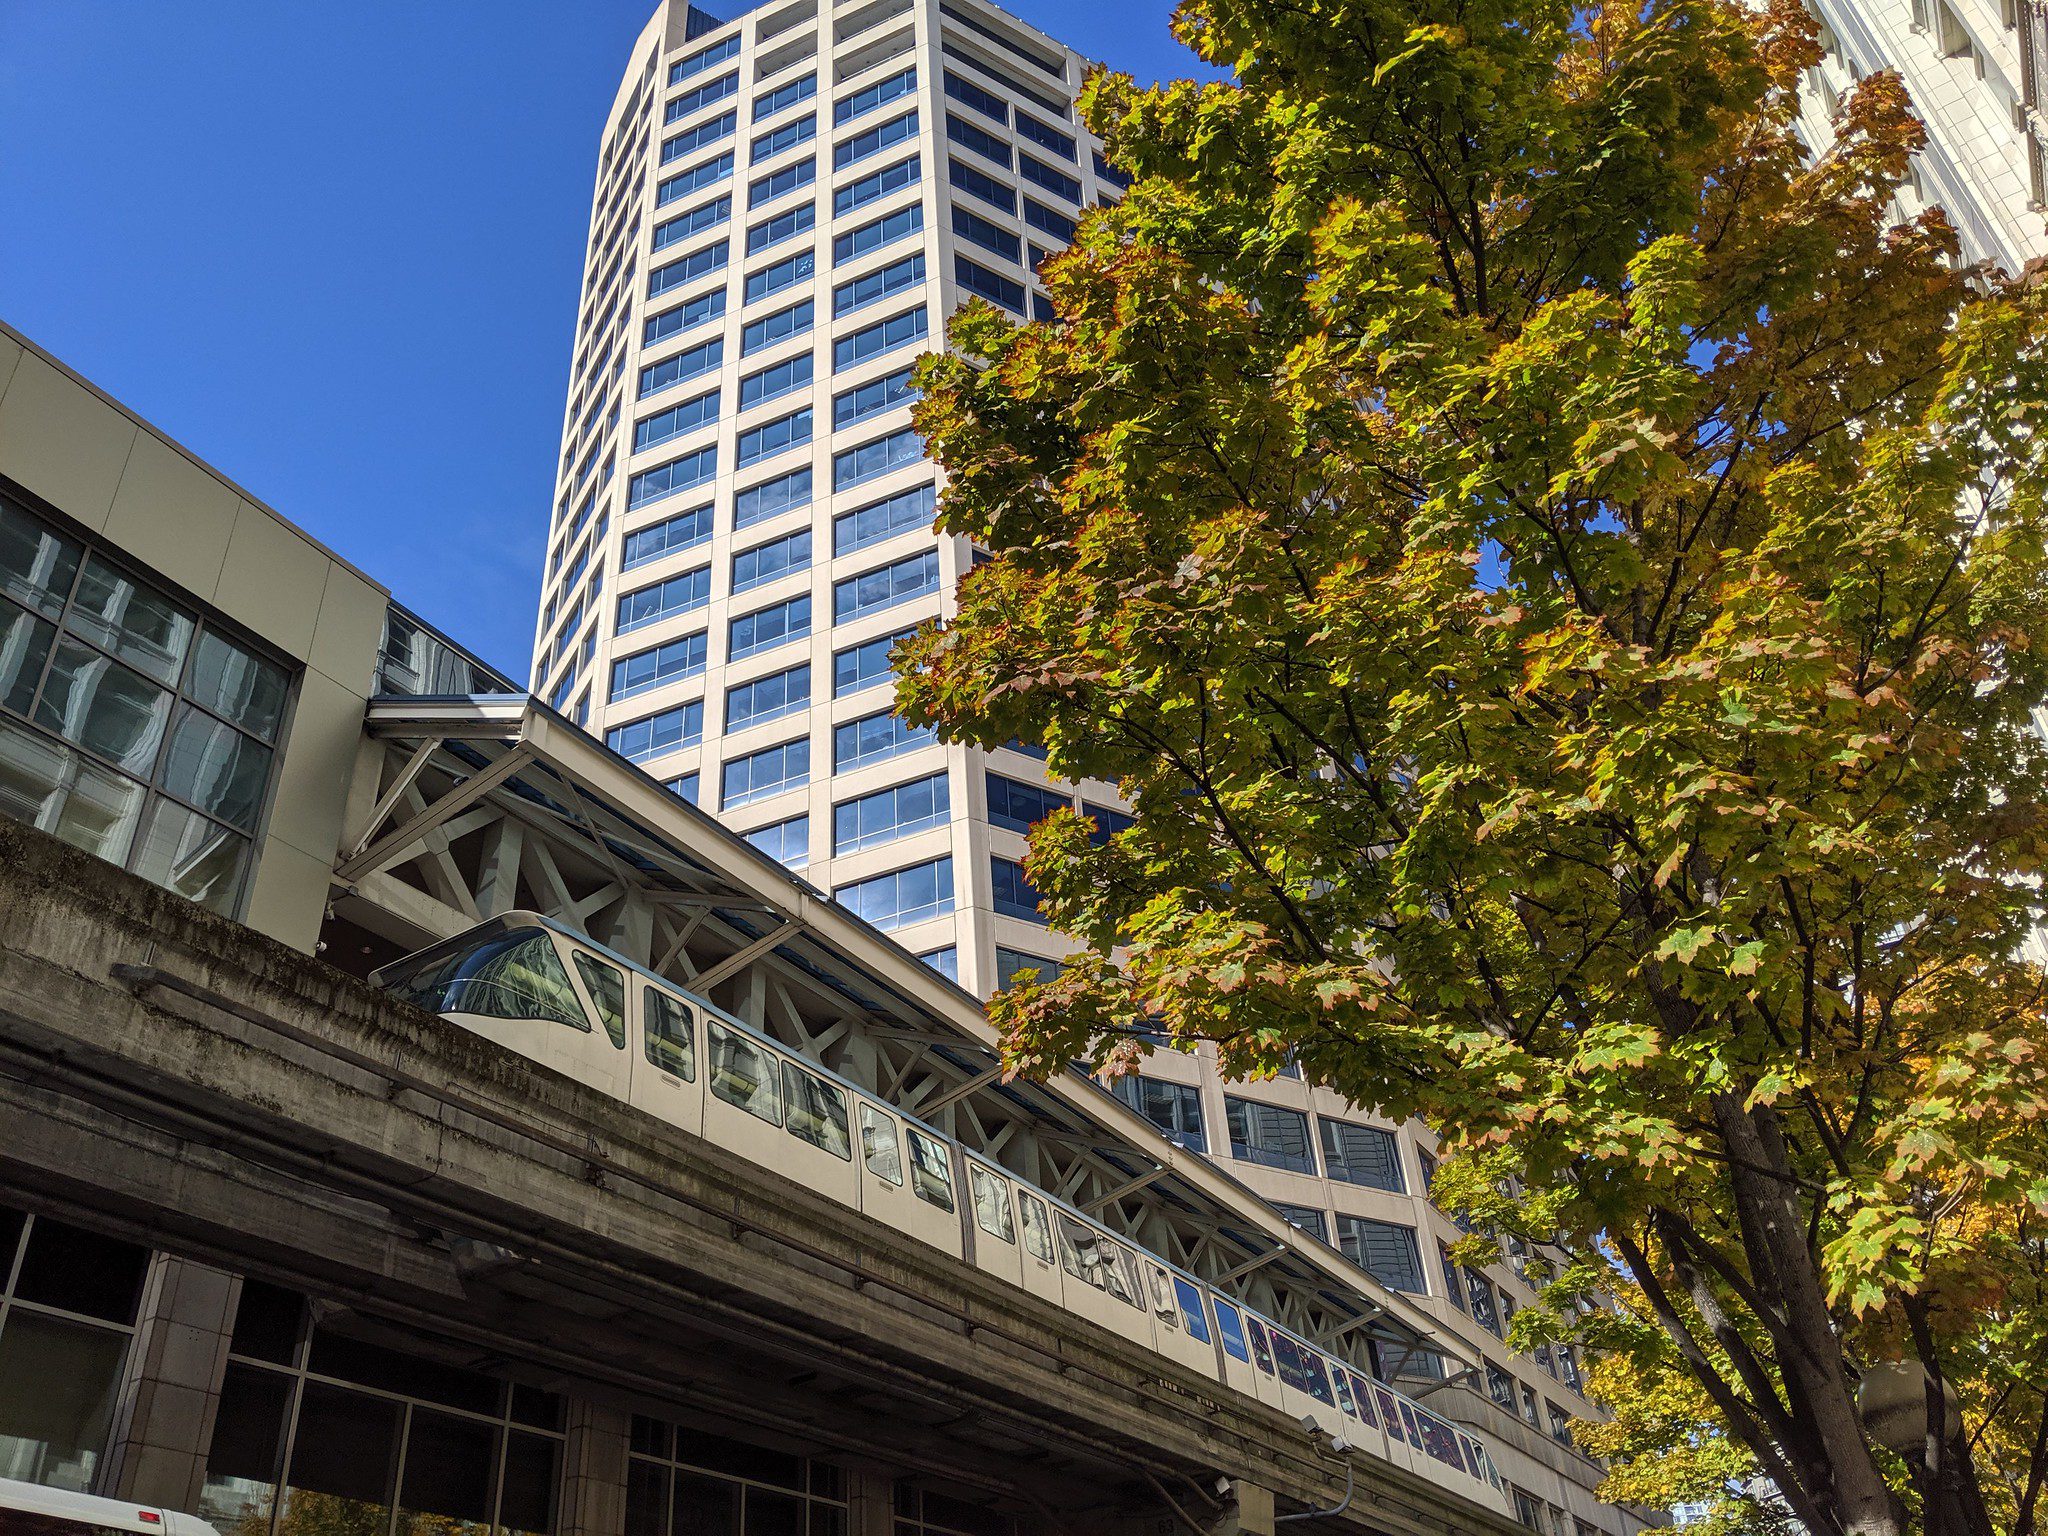 The iconic Seattle Center Monorail at Westlake Center.  